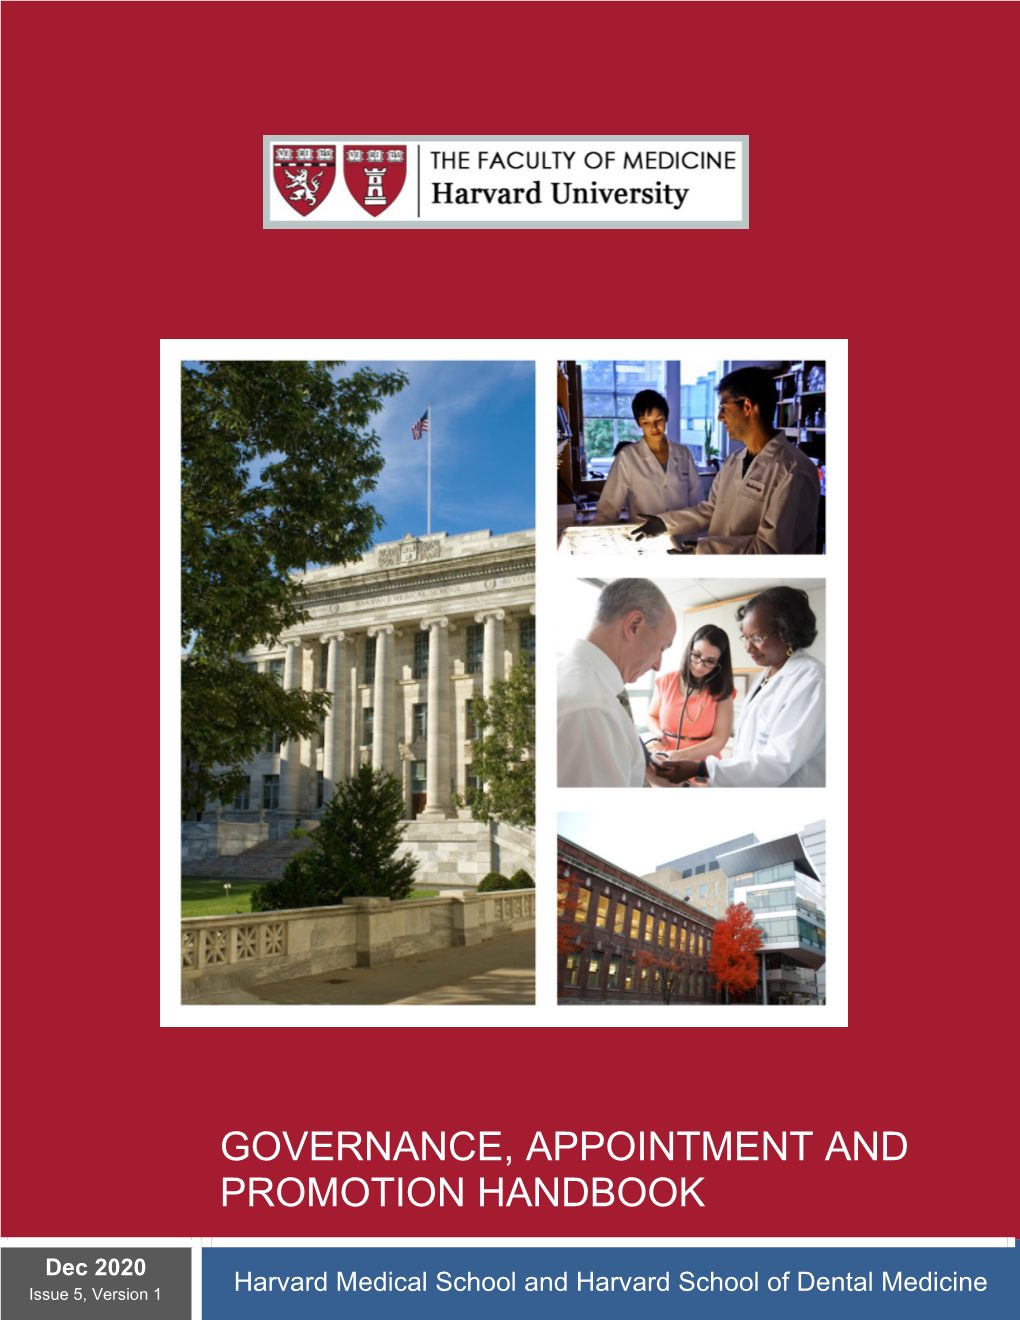 Governance, Appointment and Promotion Handbook